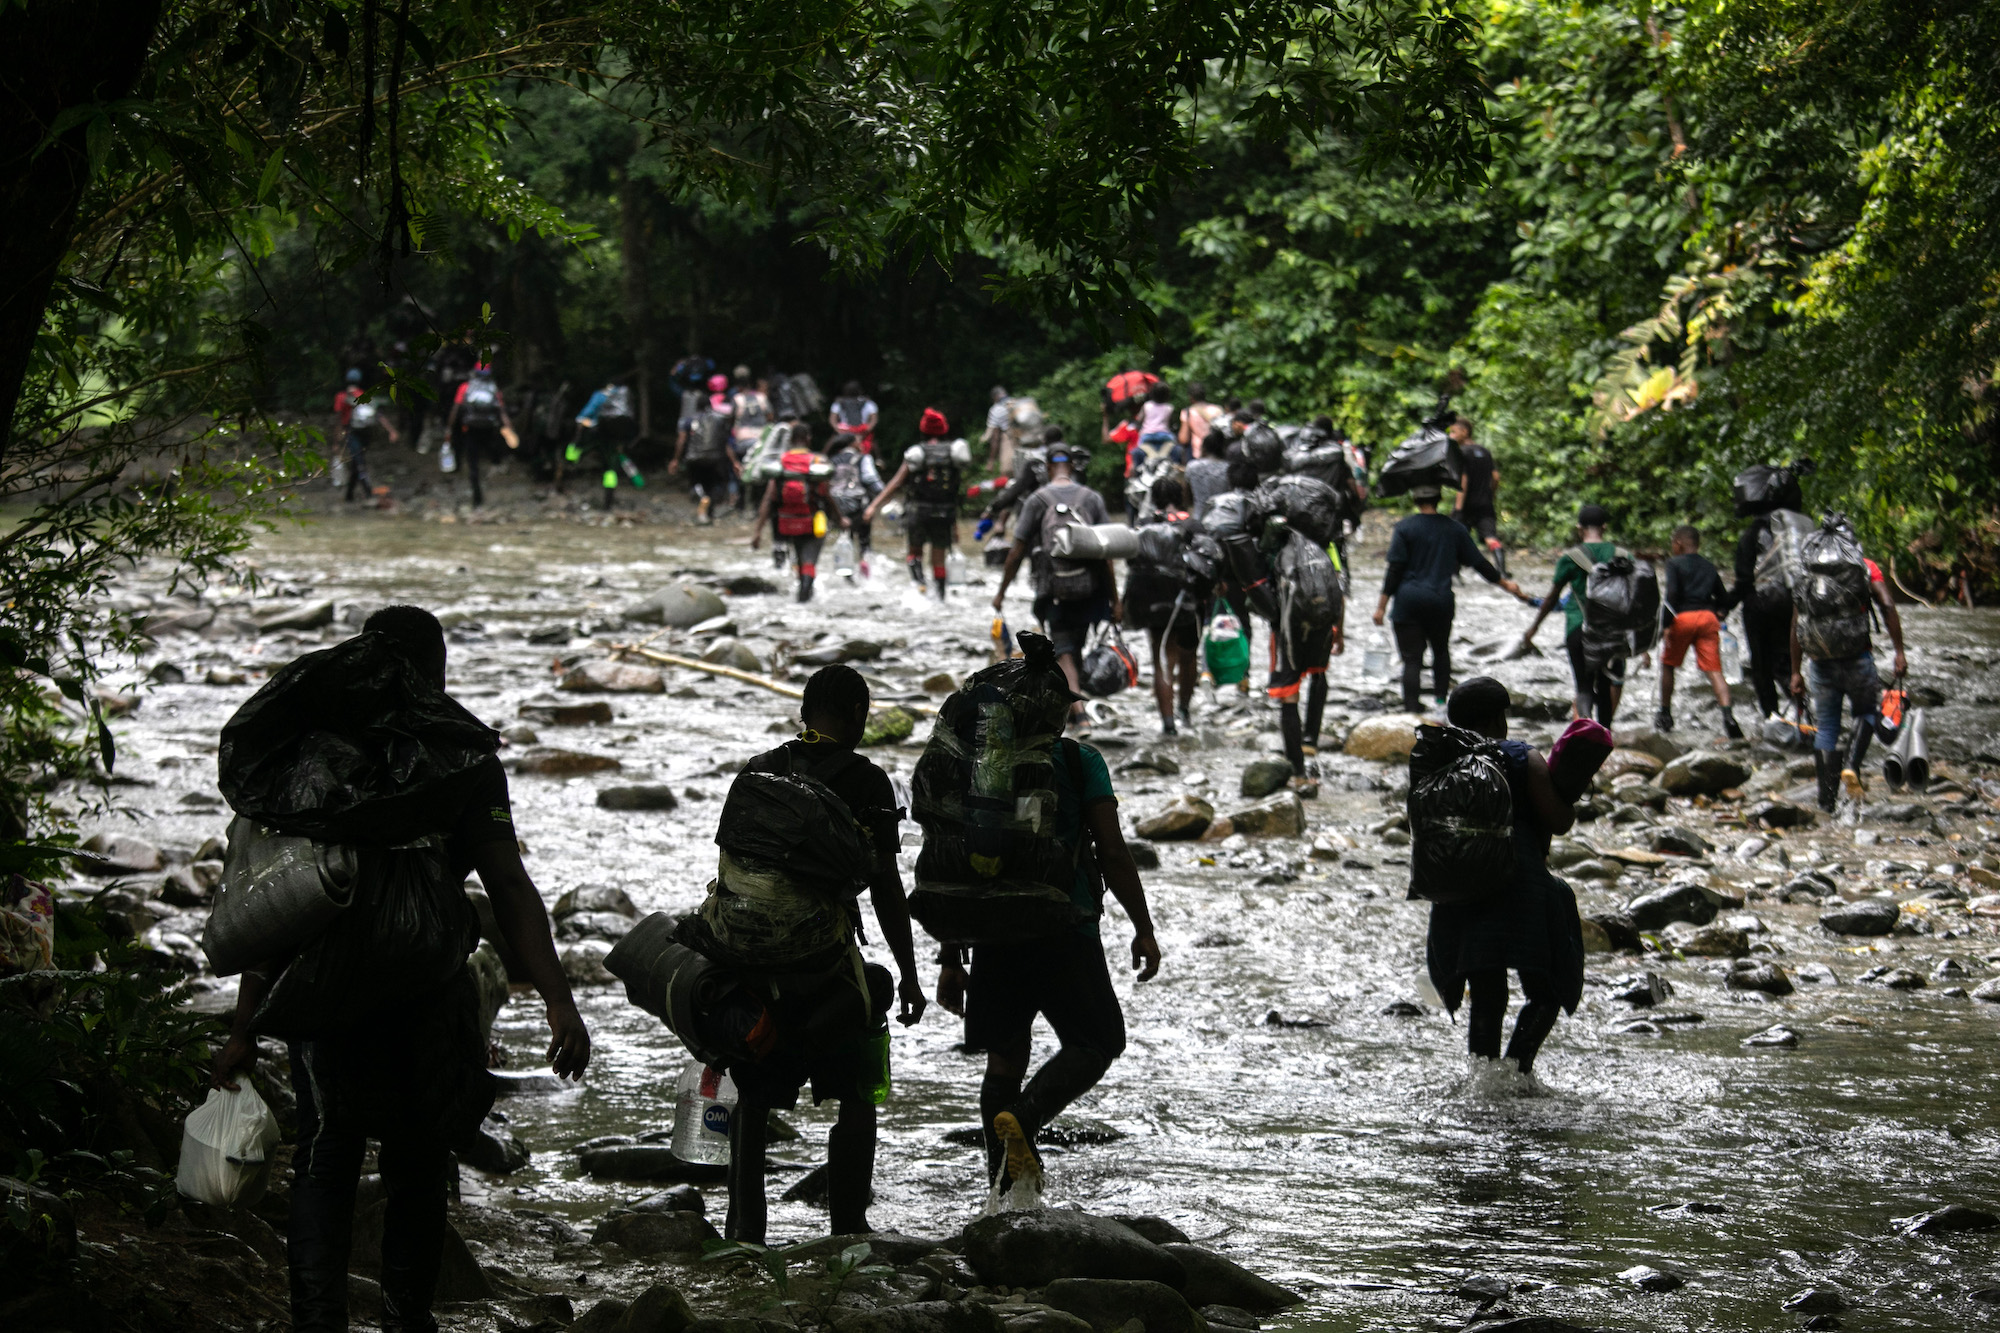 Migrants, most from Haiti, trek through the Darien Gap between Colombia and Panama, on their journey towards the United States